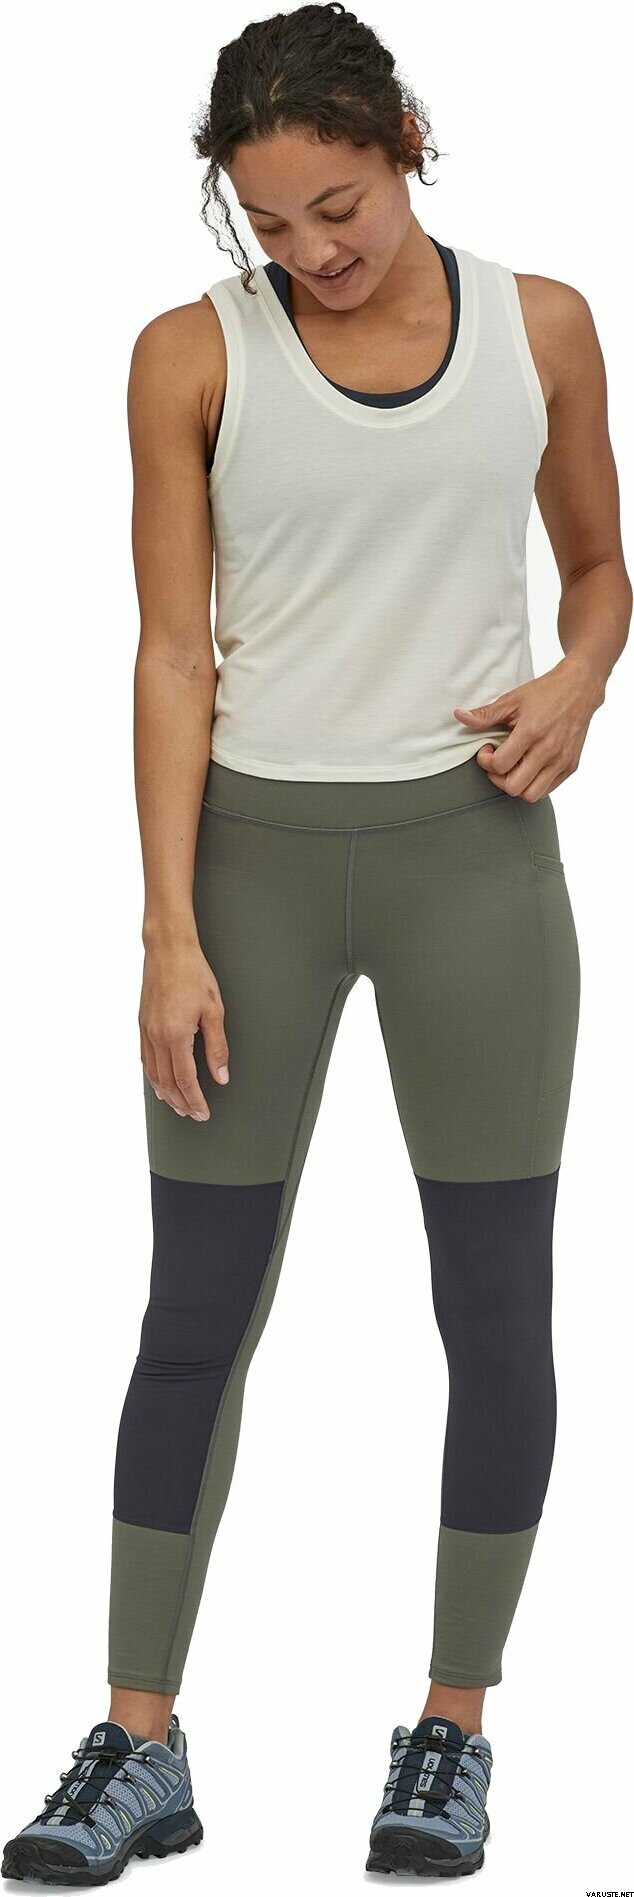 Patagonia W's Pack Out Hike Tights - Hemlock Green - L Your